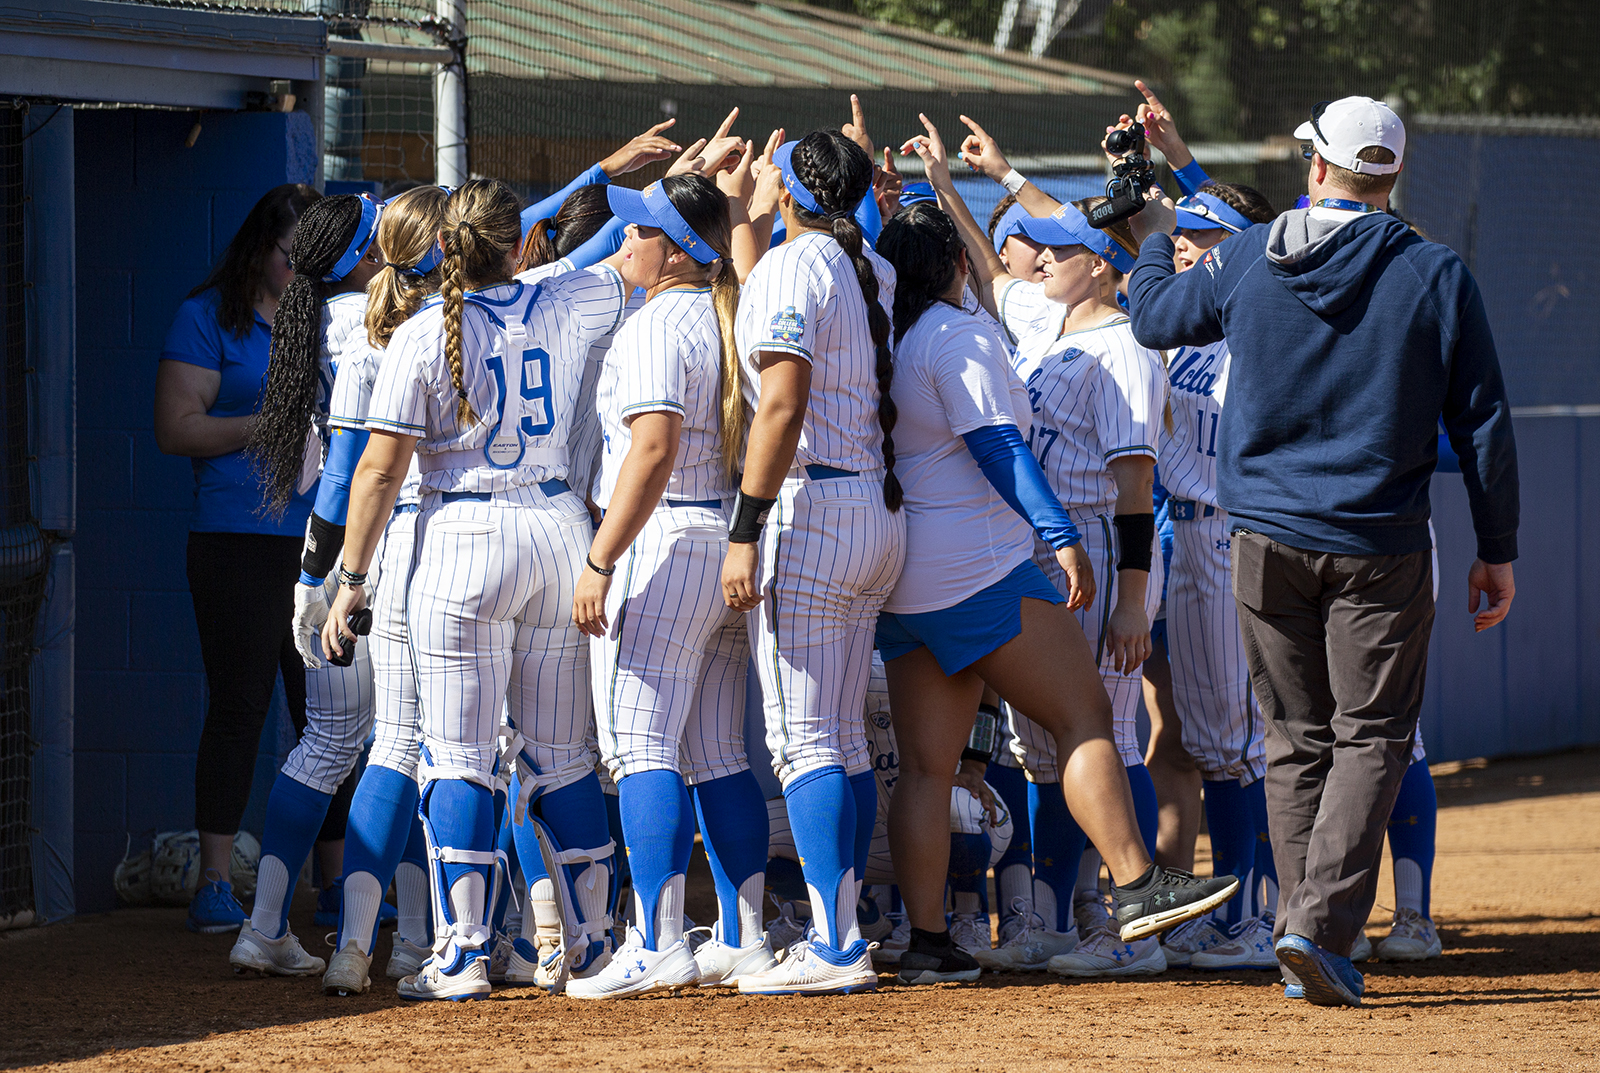 With undefeated record, UCLA softball continues tradition of strong season starts Daily Bruin